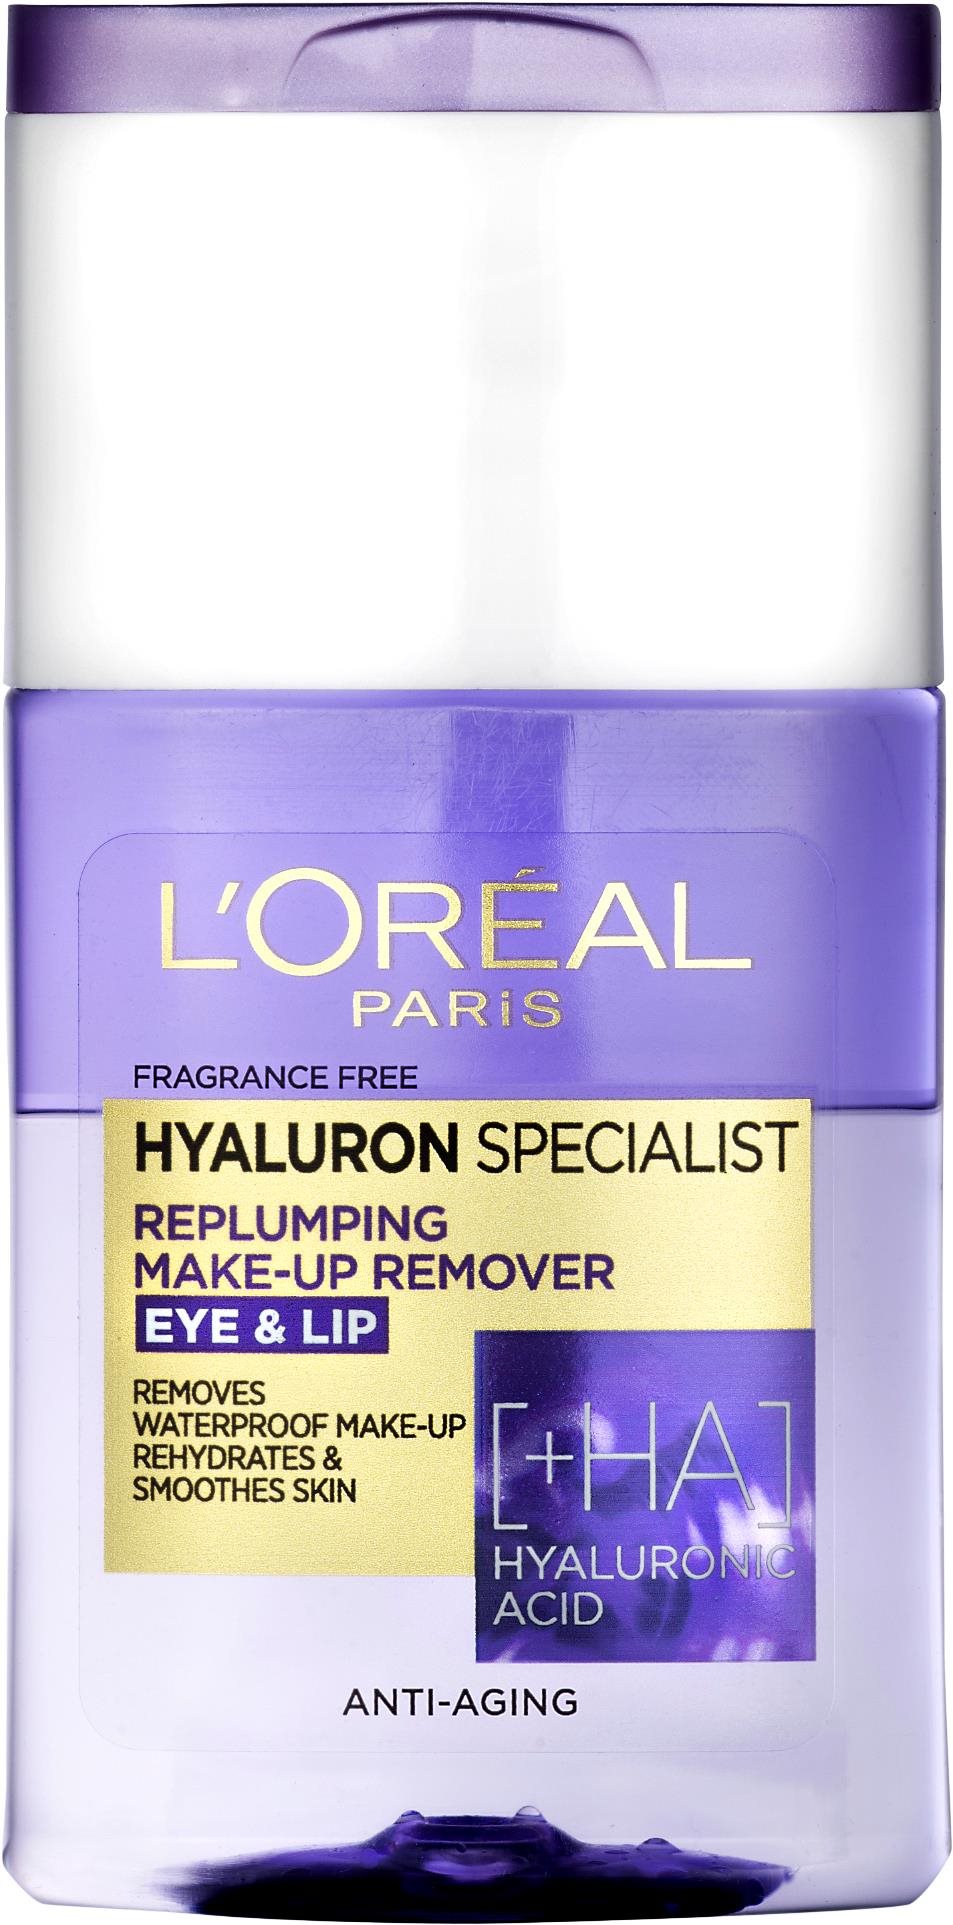 L'ORÉAL PARIS Hyaluron Specialist make-up remover with hyaluronic acid 125 ml